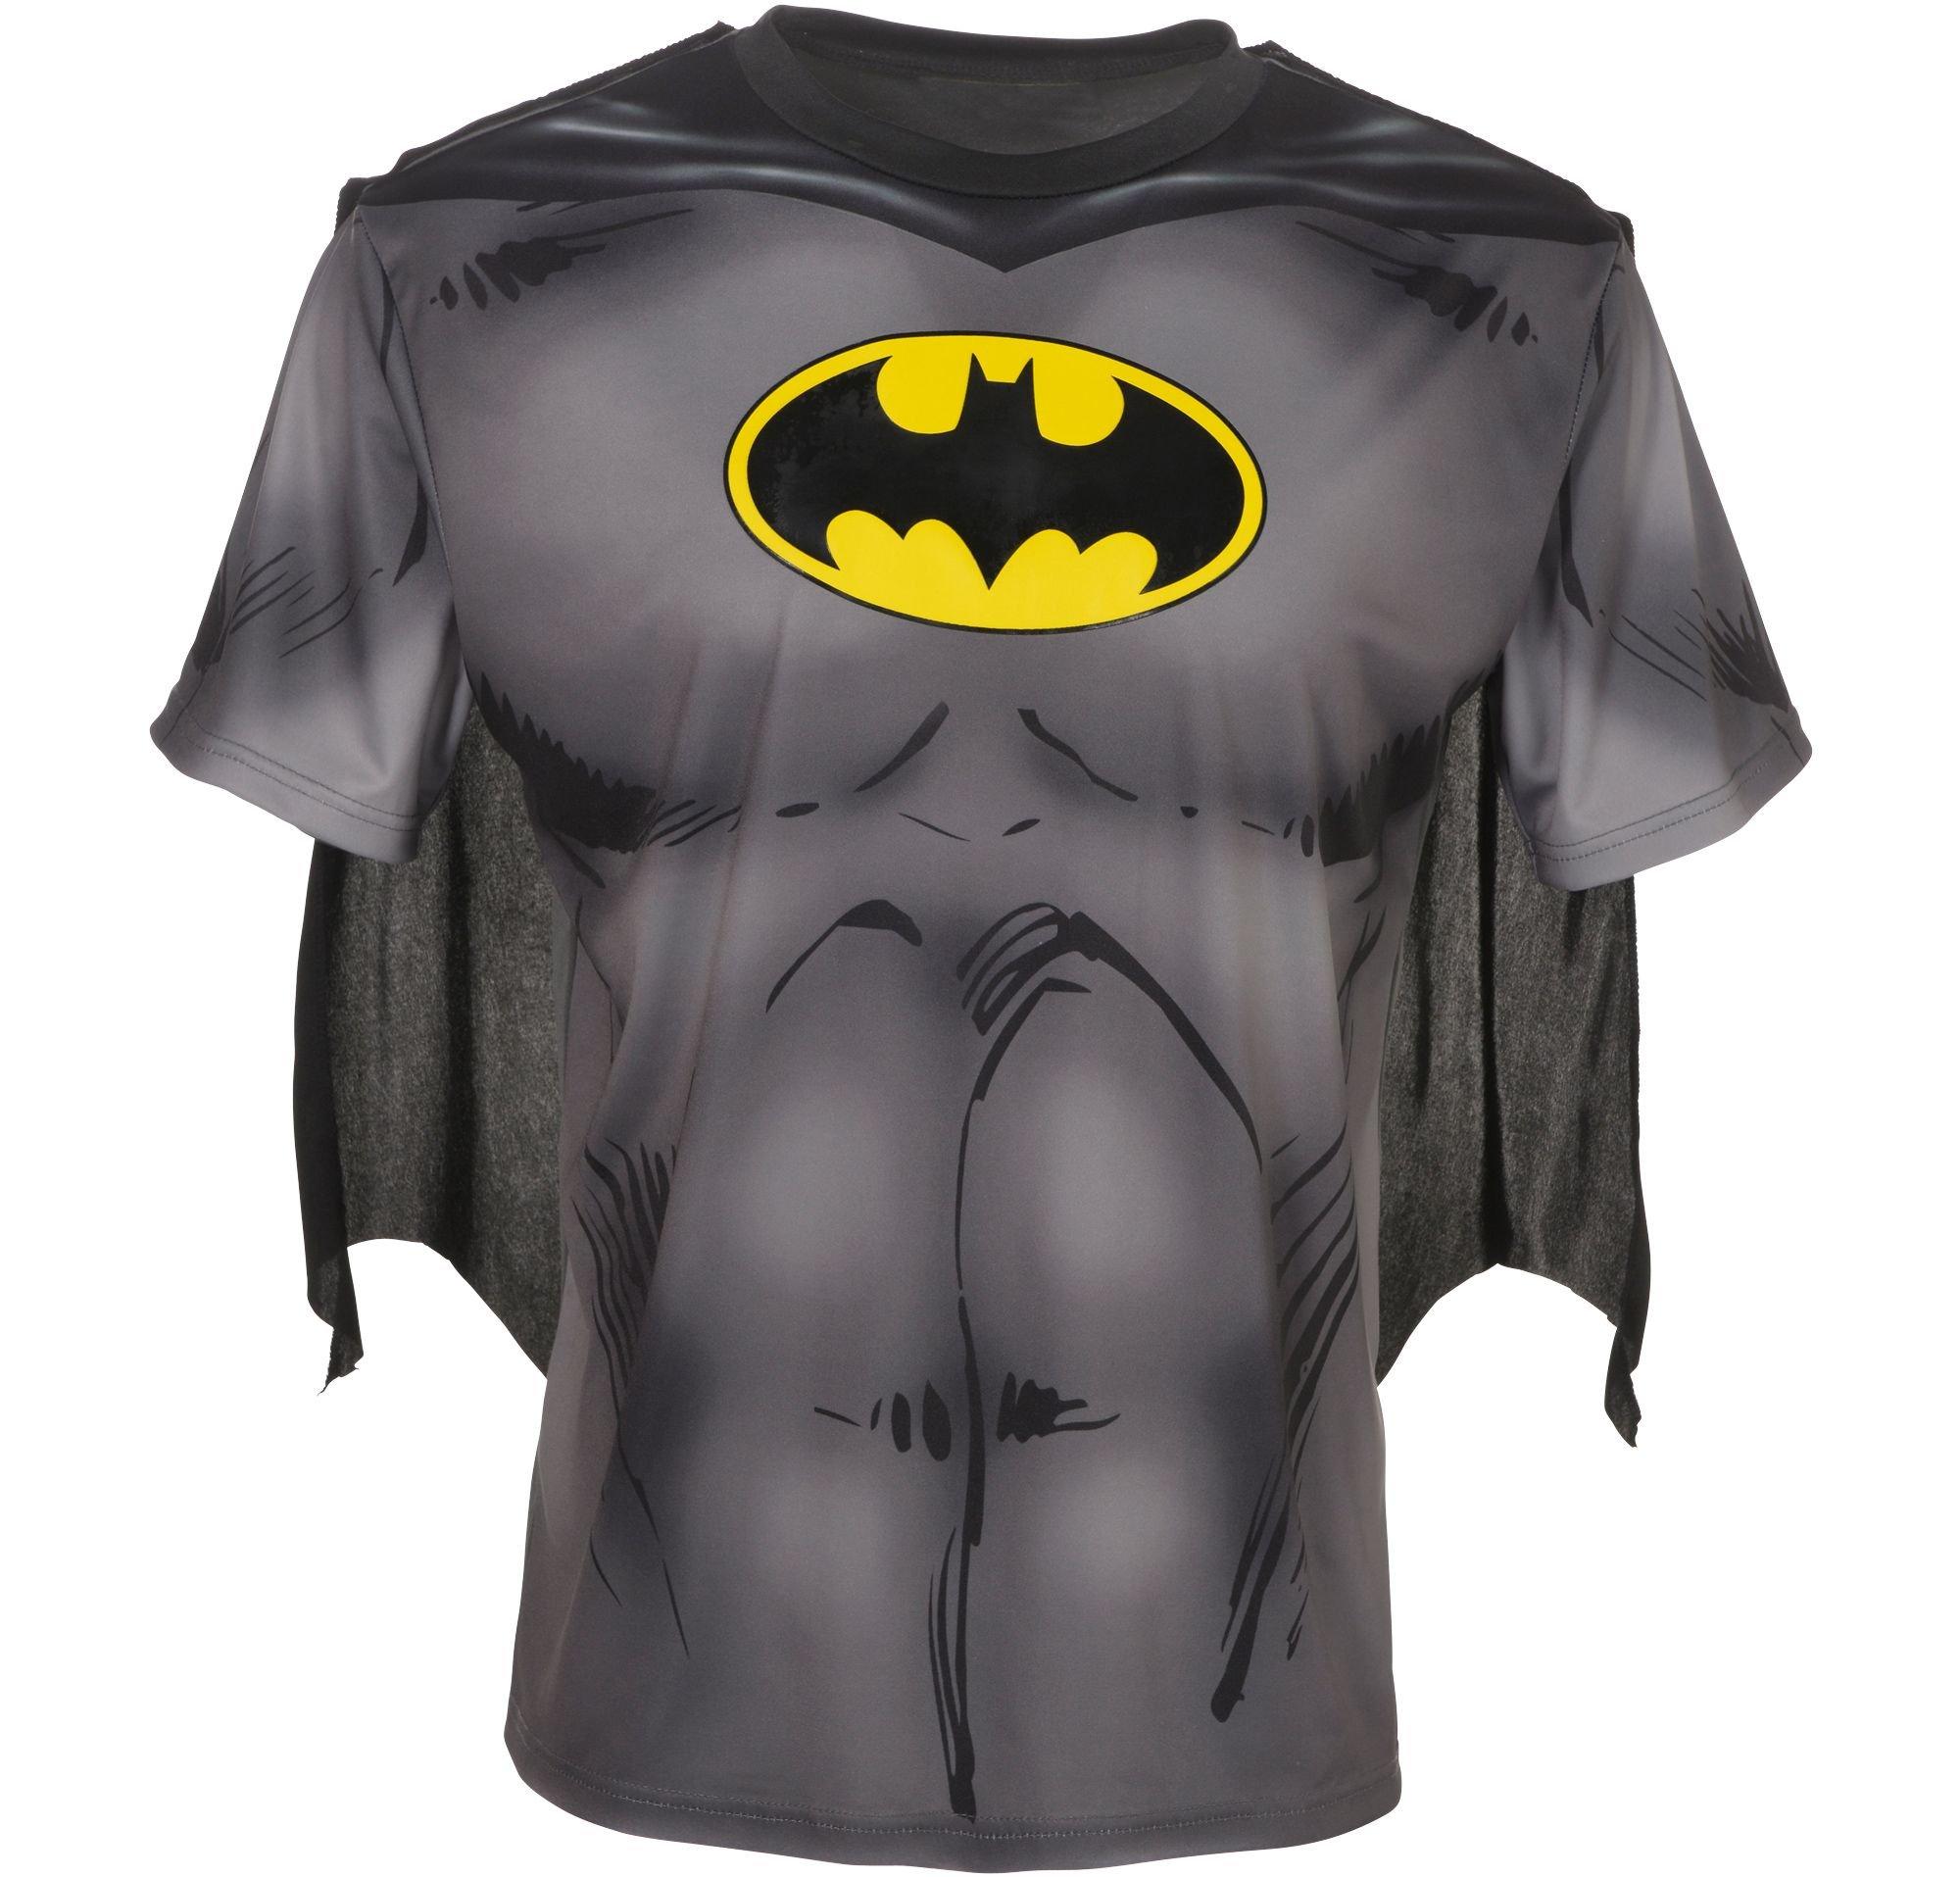 Batman Ladies Shirt with Cape - Size Small - clothing